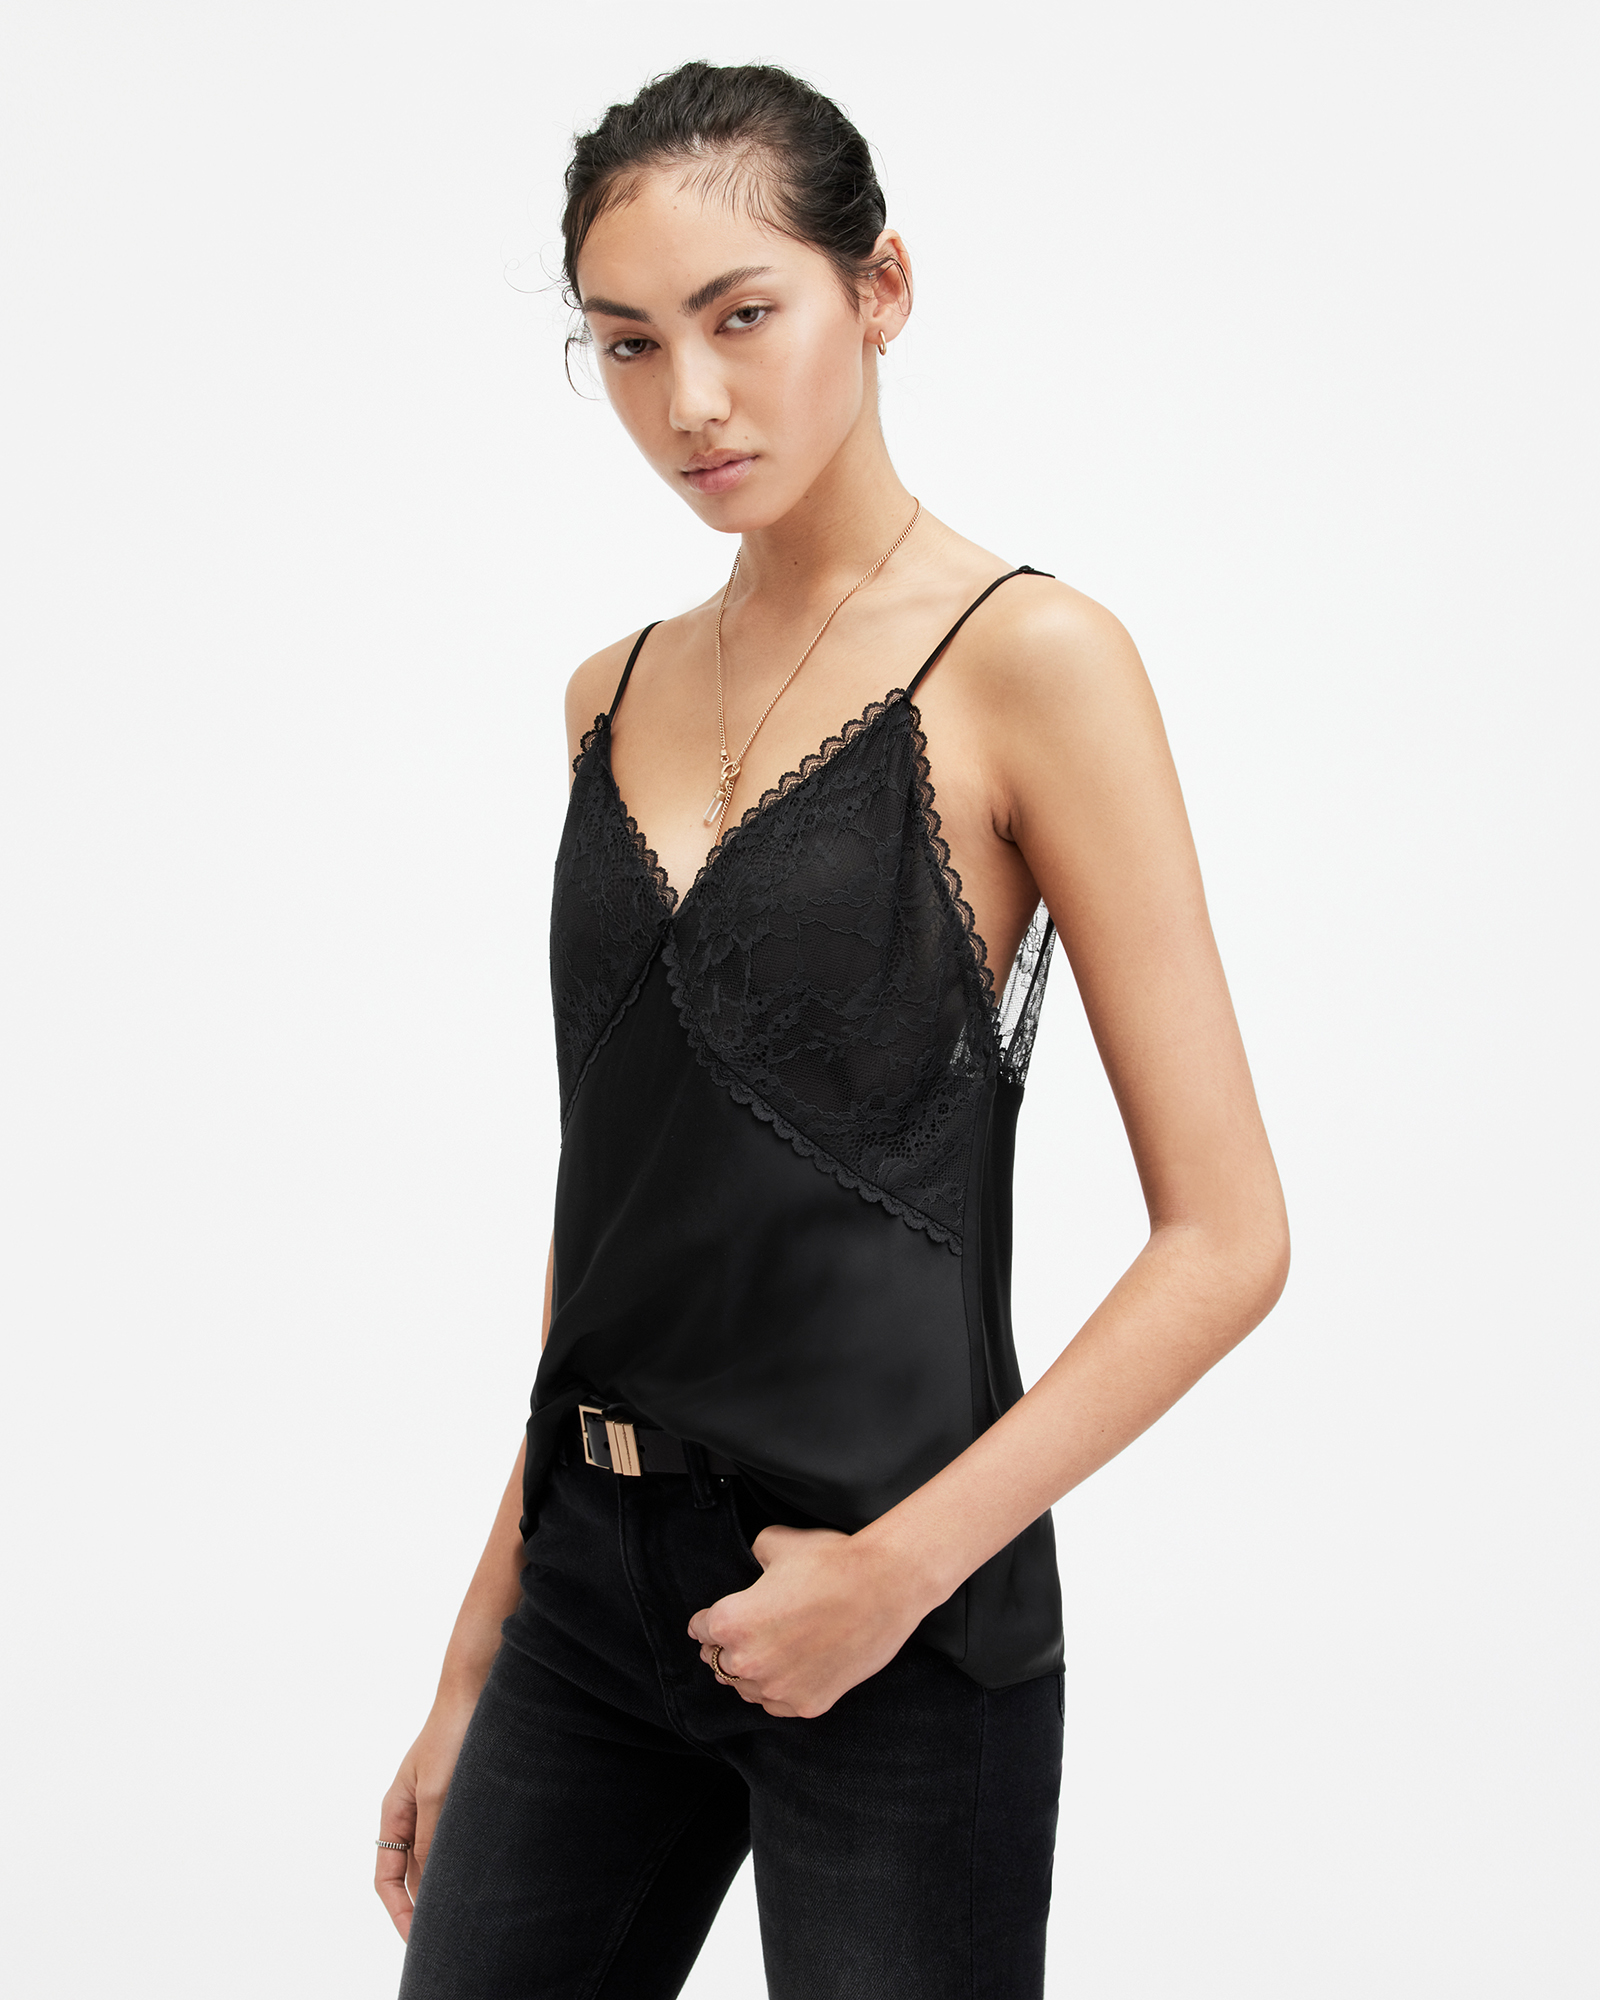 Black Lace Tank Top Camisole, See Through Elastic Lace Cami -  Canada